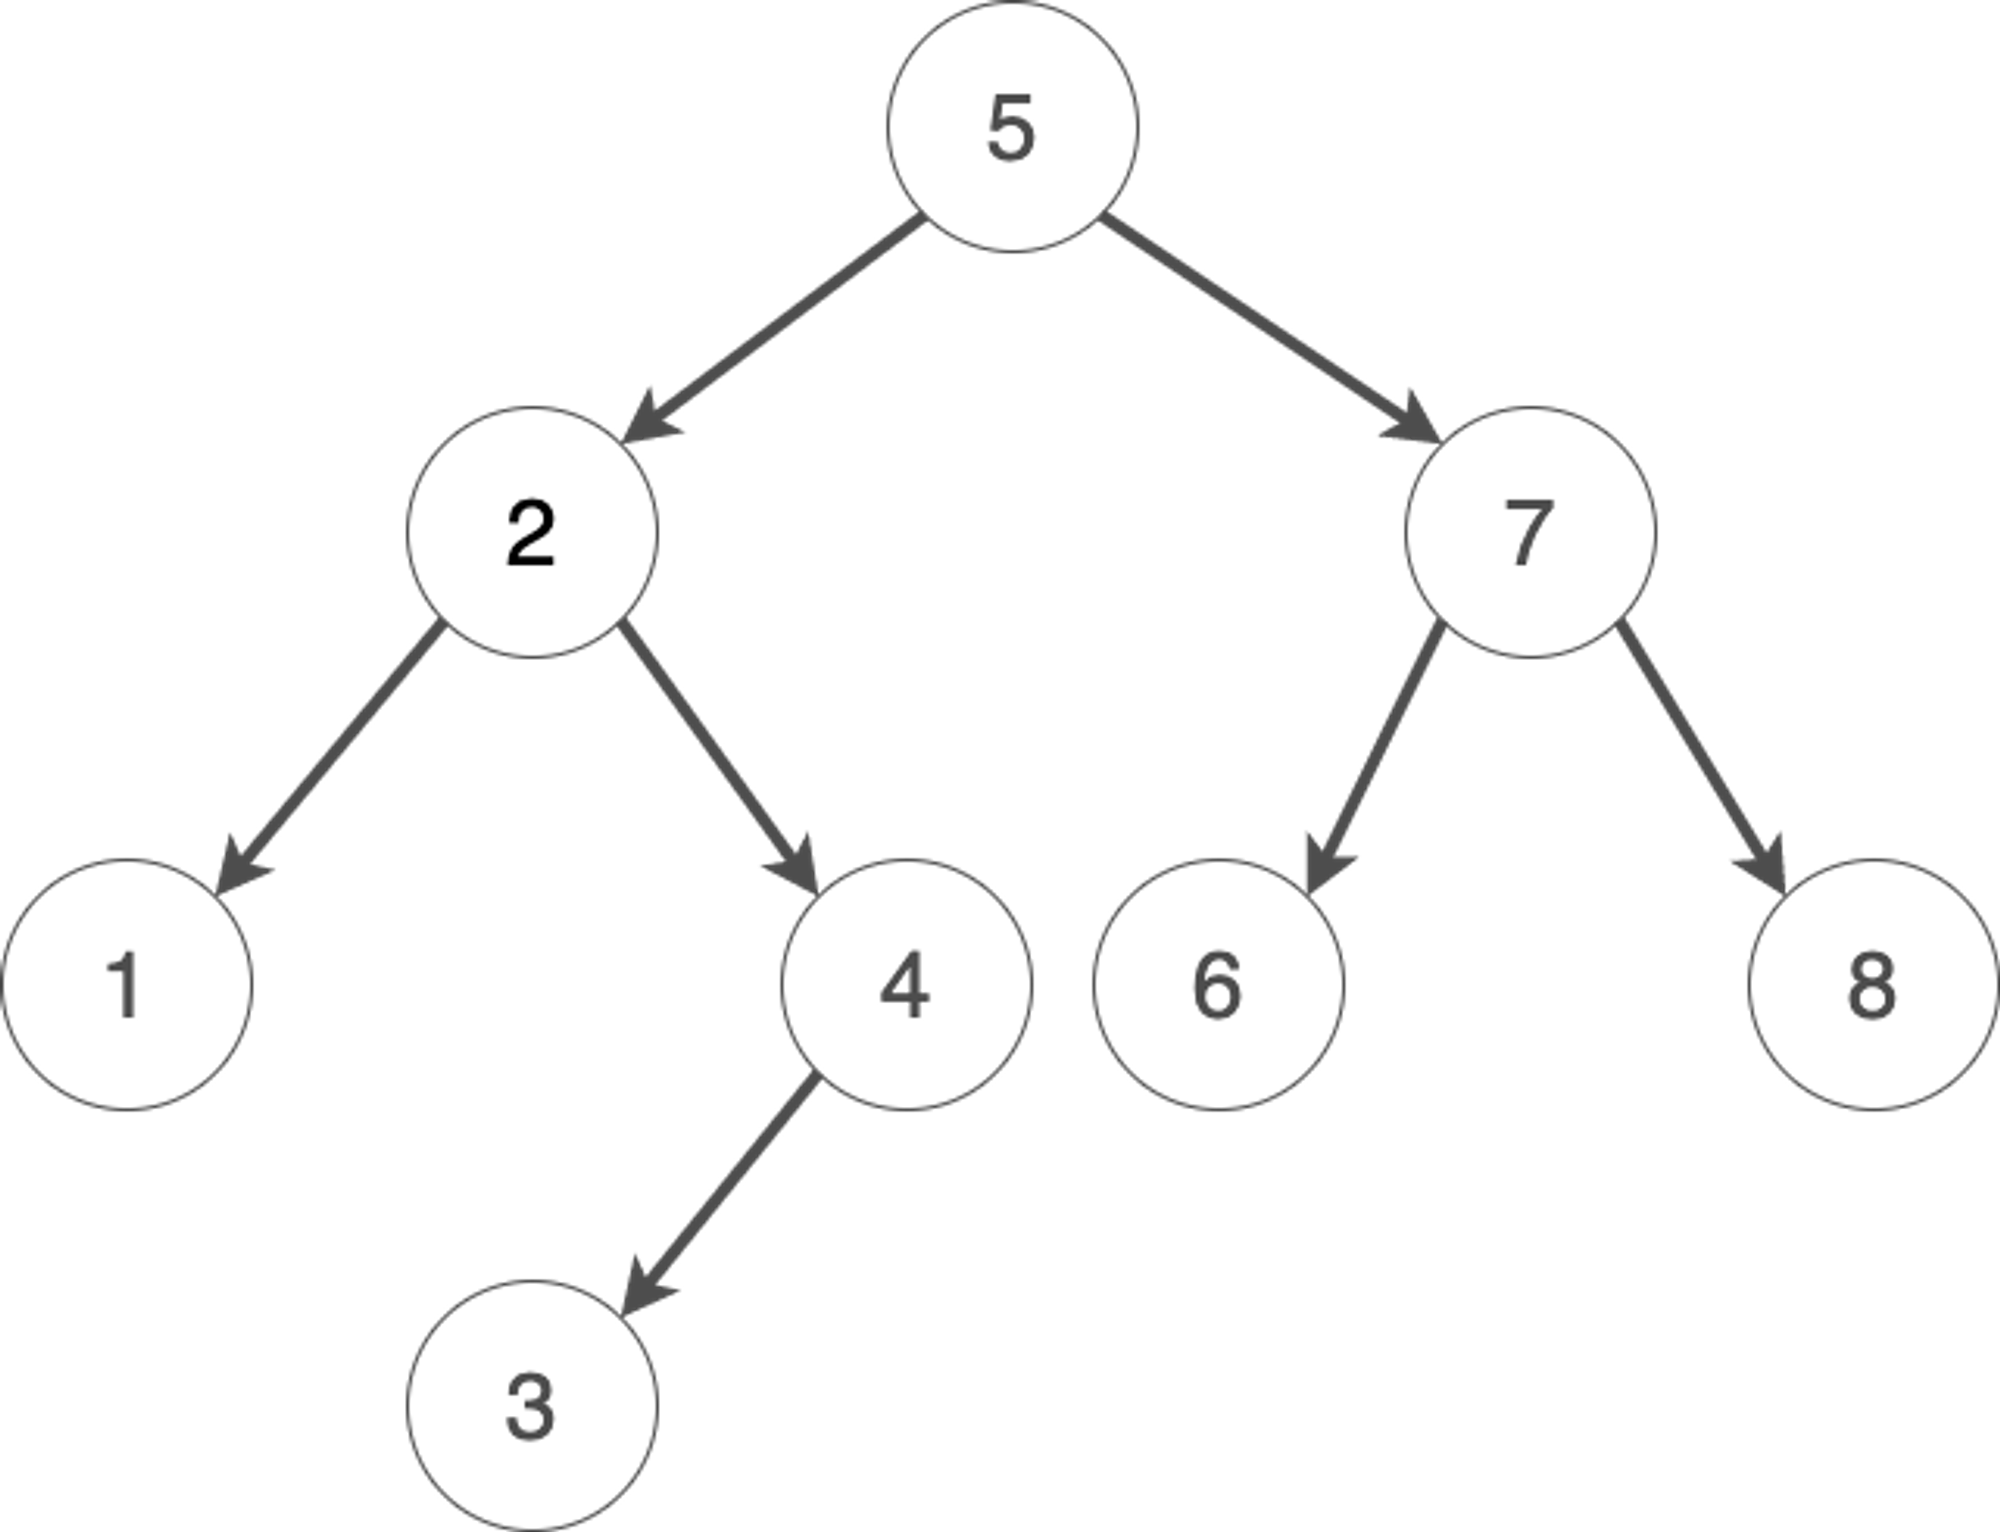 A binary search tree with 8 nodes